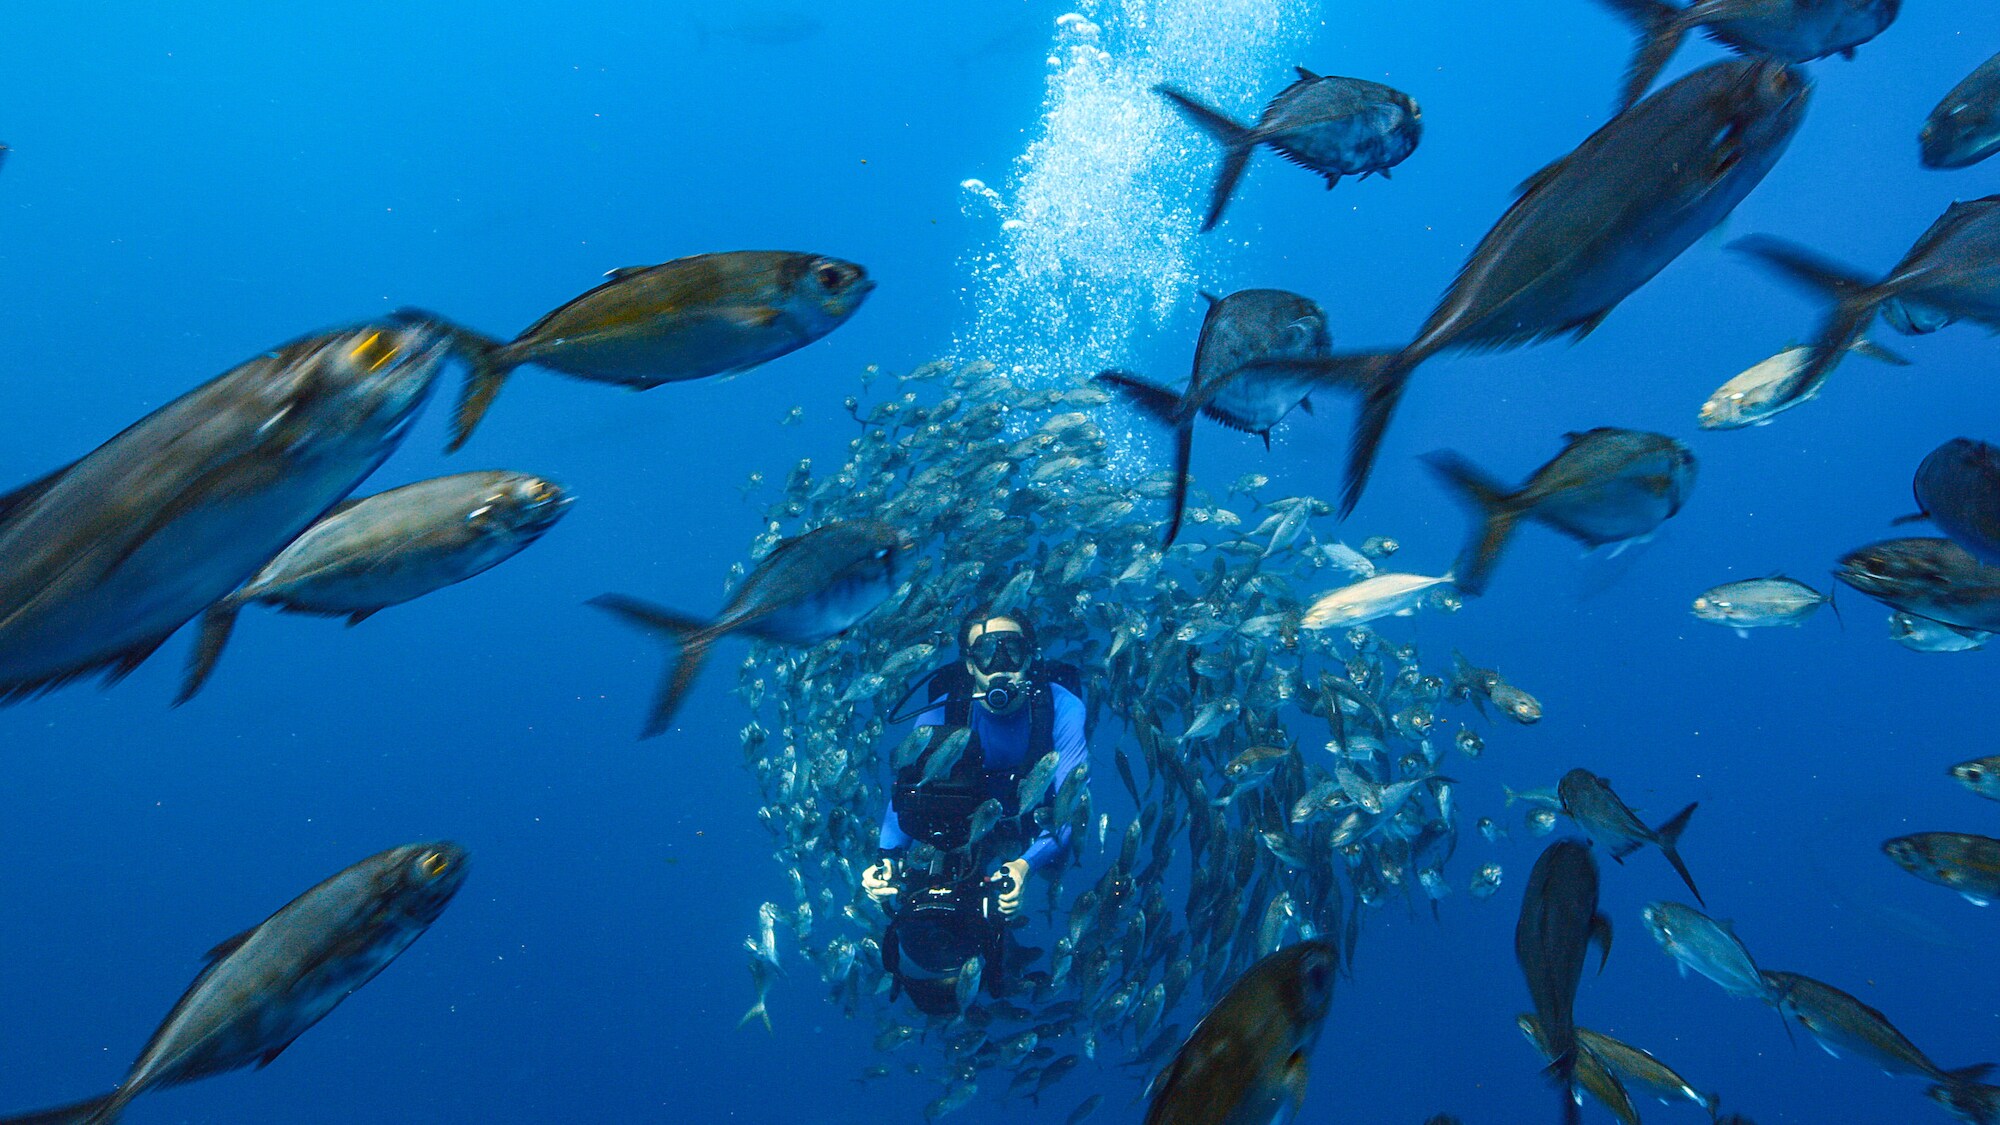 Bertie Gregory swimming through a shoal of fish. (Credit: National Geographic/Johnny Rogers for Disney+)